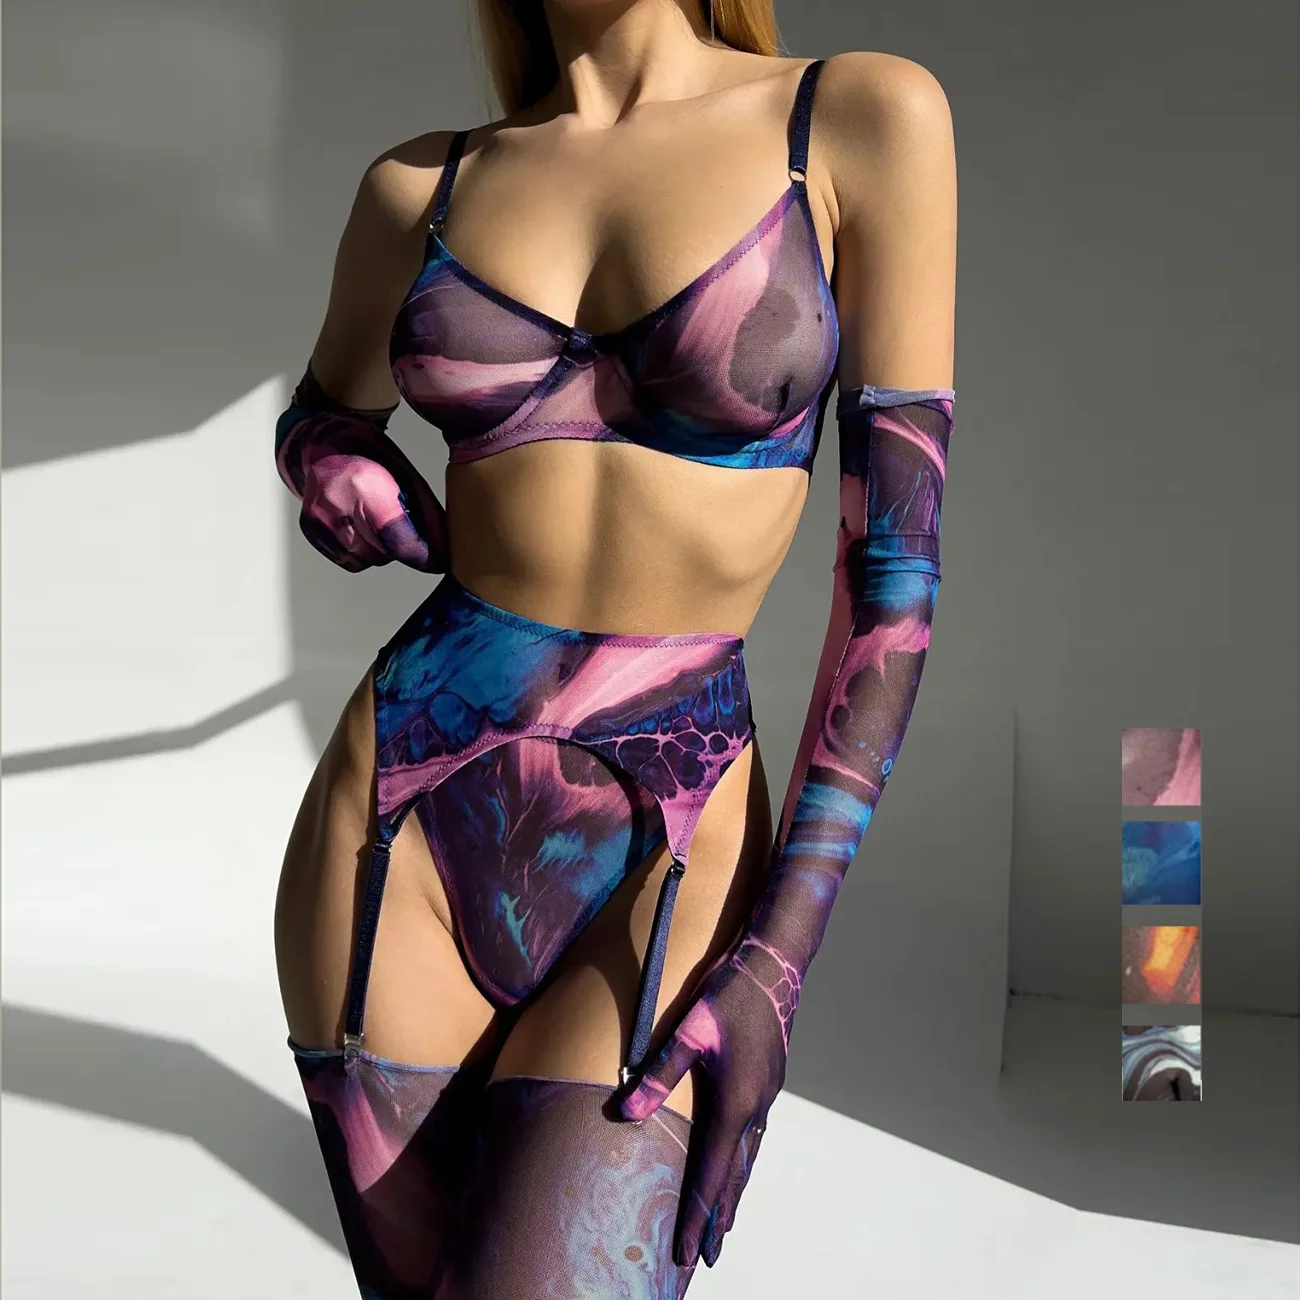 

Sexy Tie Dye Lingerie With Stocking Sleeve Sexy Fancy Underwear 5-Piece Uncensored Intimate See Through Mesh Sensual Outfits